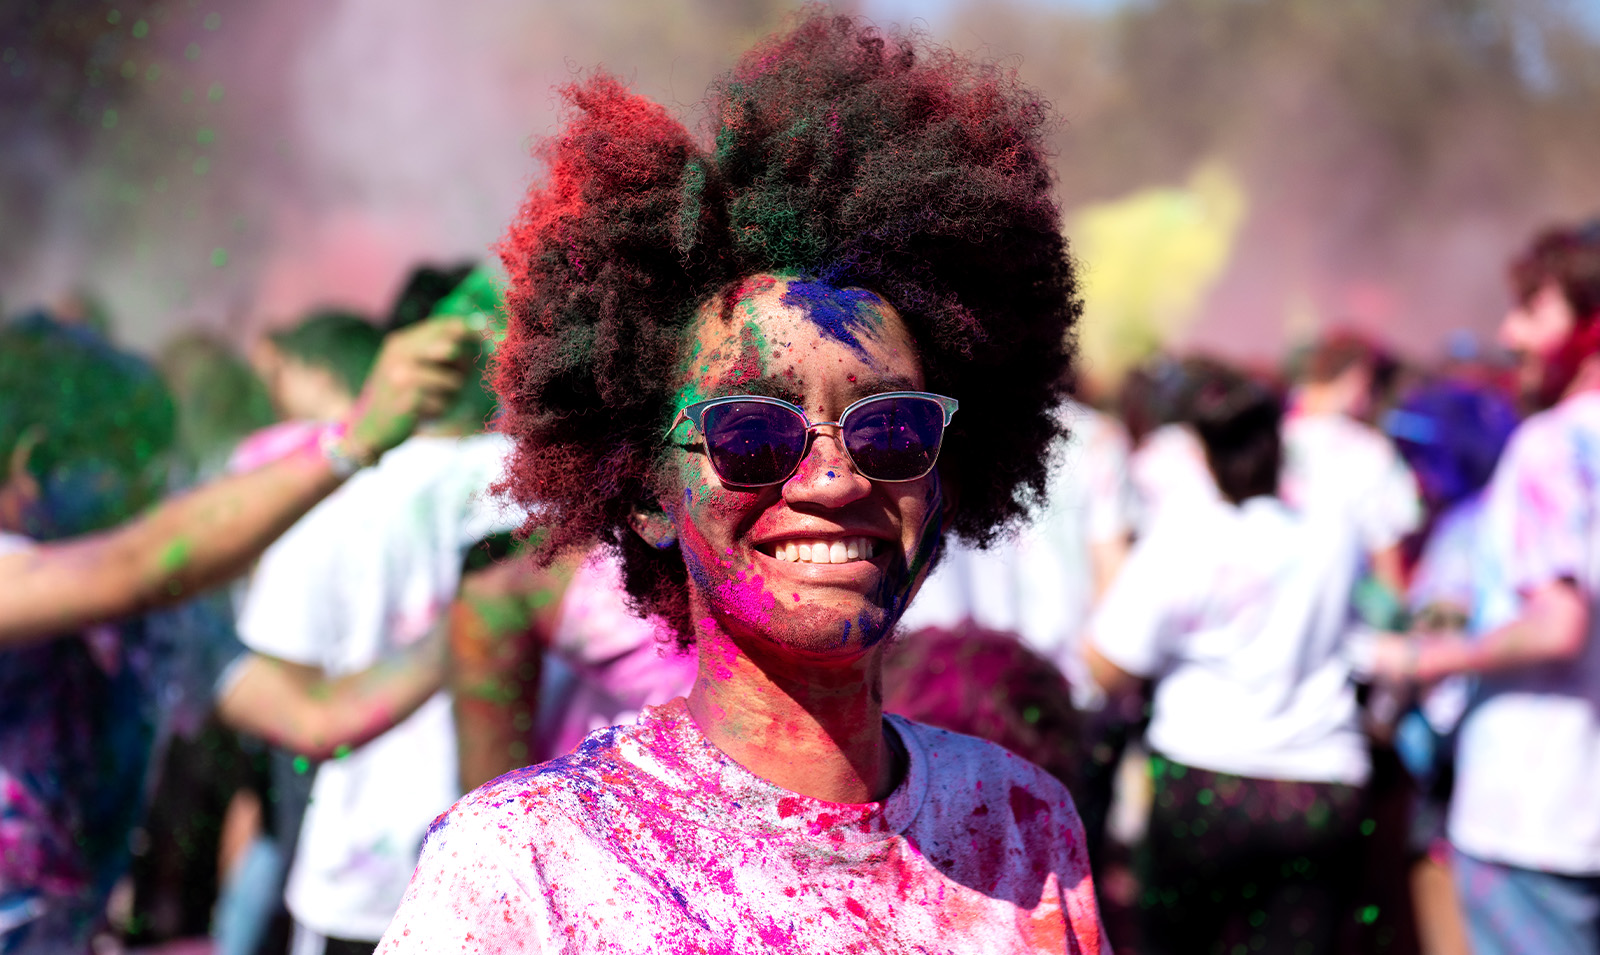 A student covered in paint celebrating Holi.